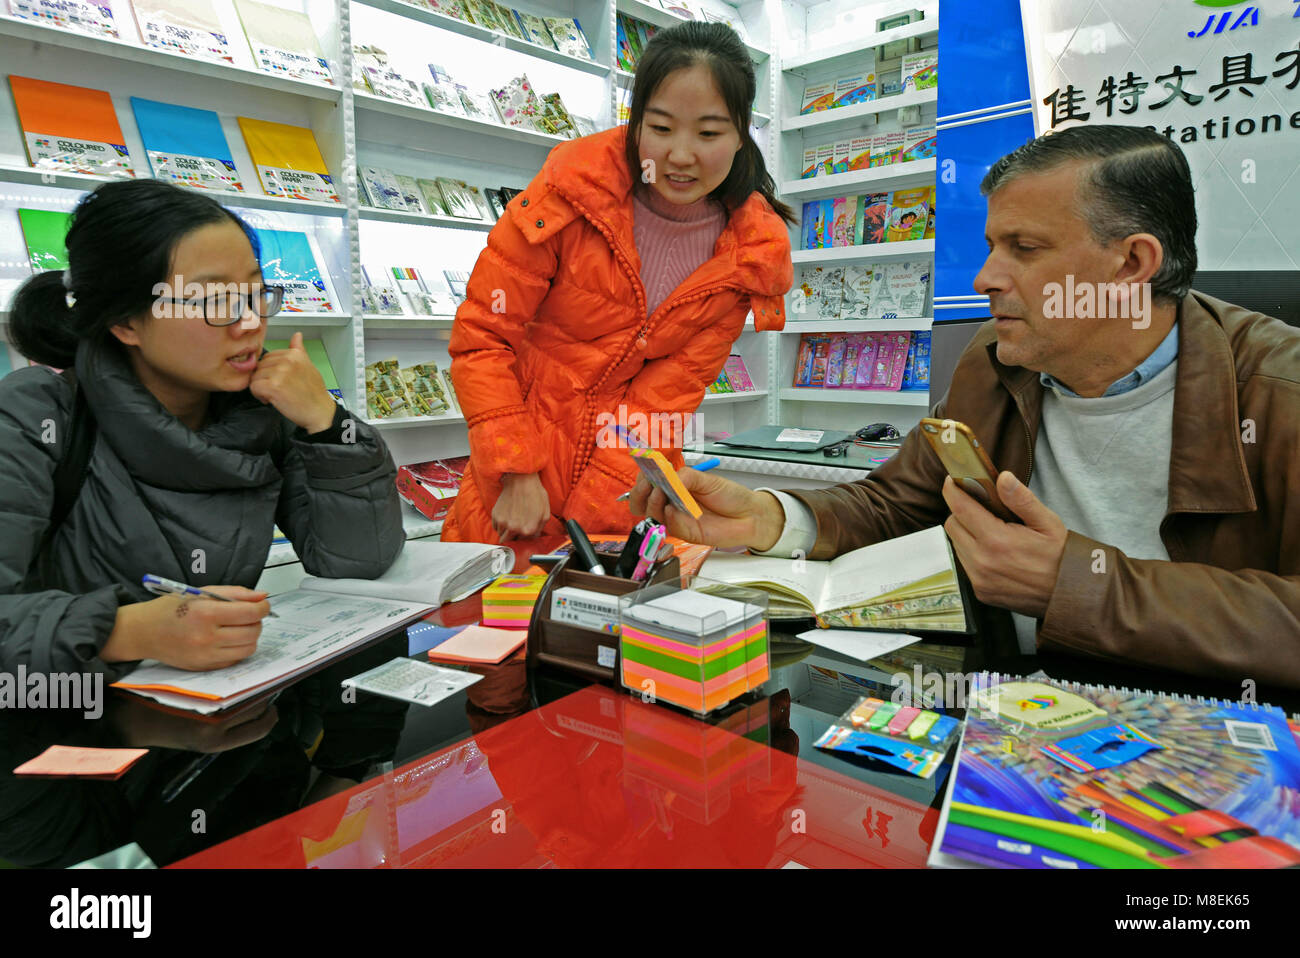 (180317) -- YIWU, March 17, 2018 (Xinhua) -- Pakistani businessman Yousef Hamurerwi (1t R) selects stationeries at the international shopping mall in Yiwu, a city specialized in small goods trade in east China's Zhejiang Province, Jan. 3, 2018. Zhejiang's trade with countries and regions related to China's Belt and Road Initiative reached 149.89 billion yuan (23.68 billion U.S. dollars) in the first two months of 2018, growing 37.3 percent year on year and accounting for 11.9 percent of China's total, according to the latest figures issued by the Hangzhou Customs. (Xinhua/Tan Jin) (ry) Stock Photo